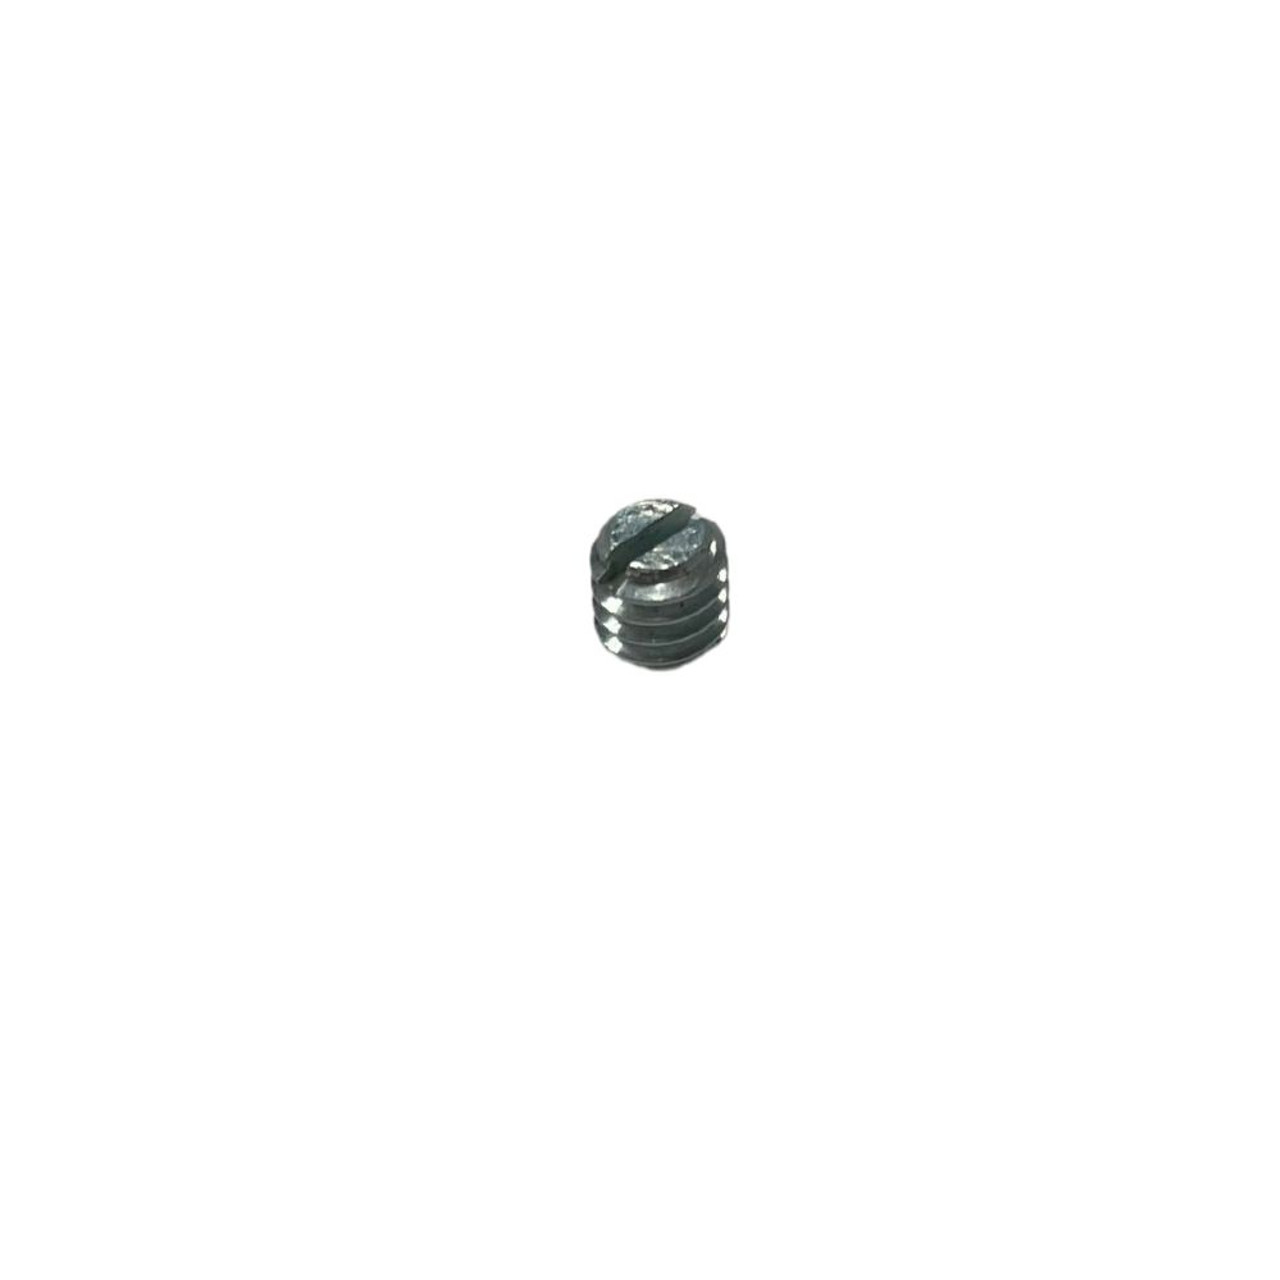 Screw for motor connector